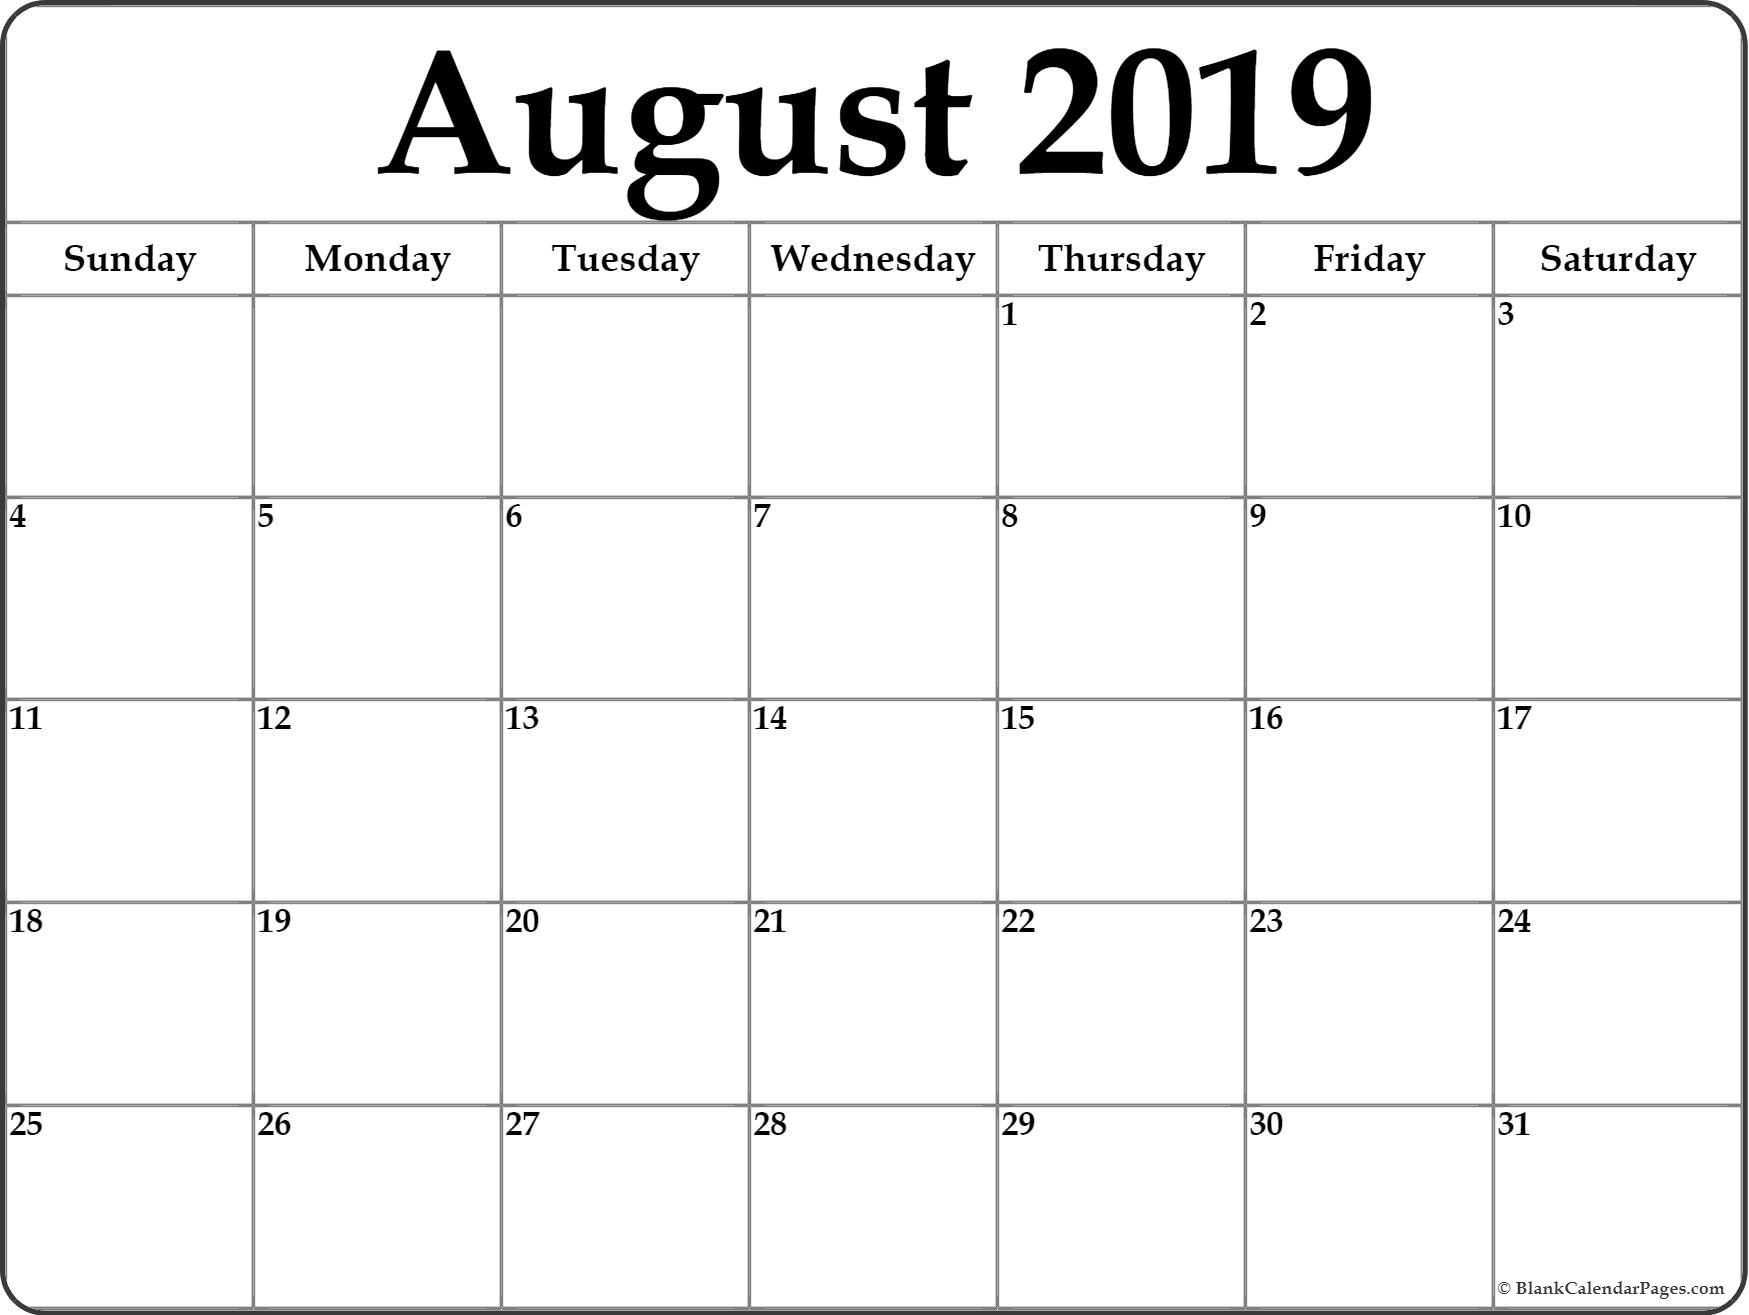 August 2019 Calendar | Free Printable Monthly Calendars Printable Monthly Calendar With No Weekends